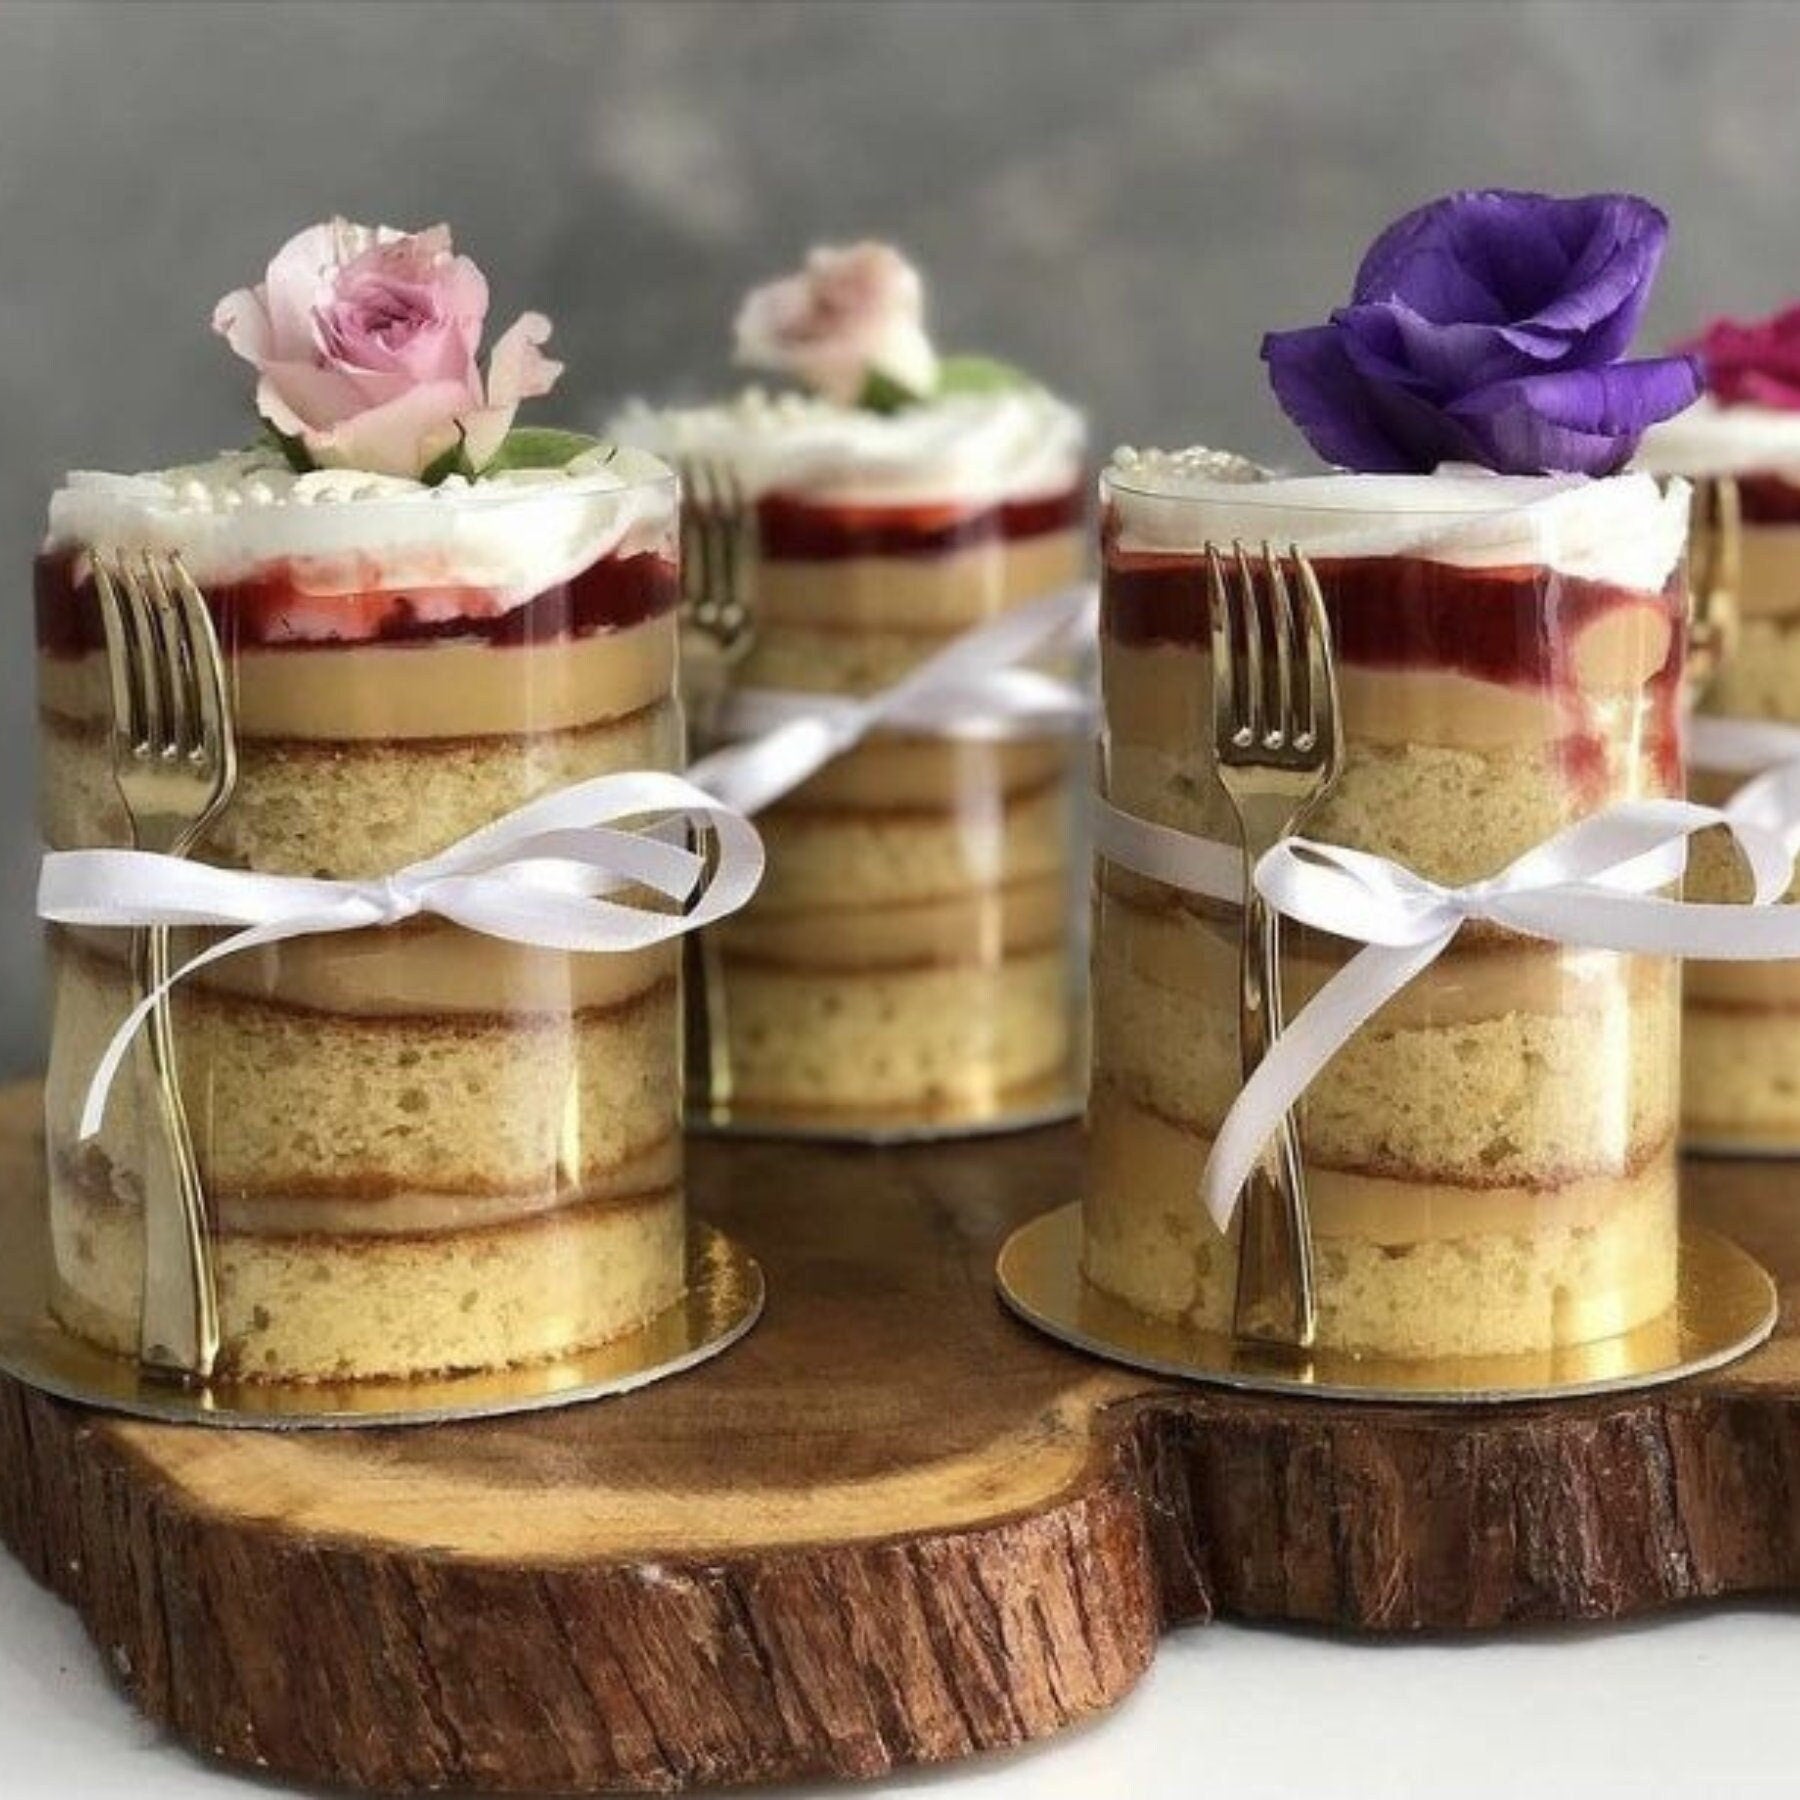 9 Mini Wedding Favors That Your Wedding Guests Will Go Crazy For: #7. Mini  Wedding Cakes | Mini wedding cakes, Wedding cake favors, Small wedding cakes